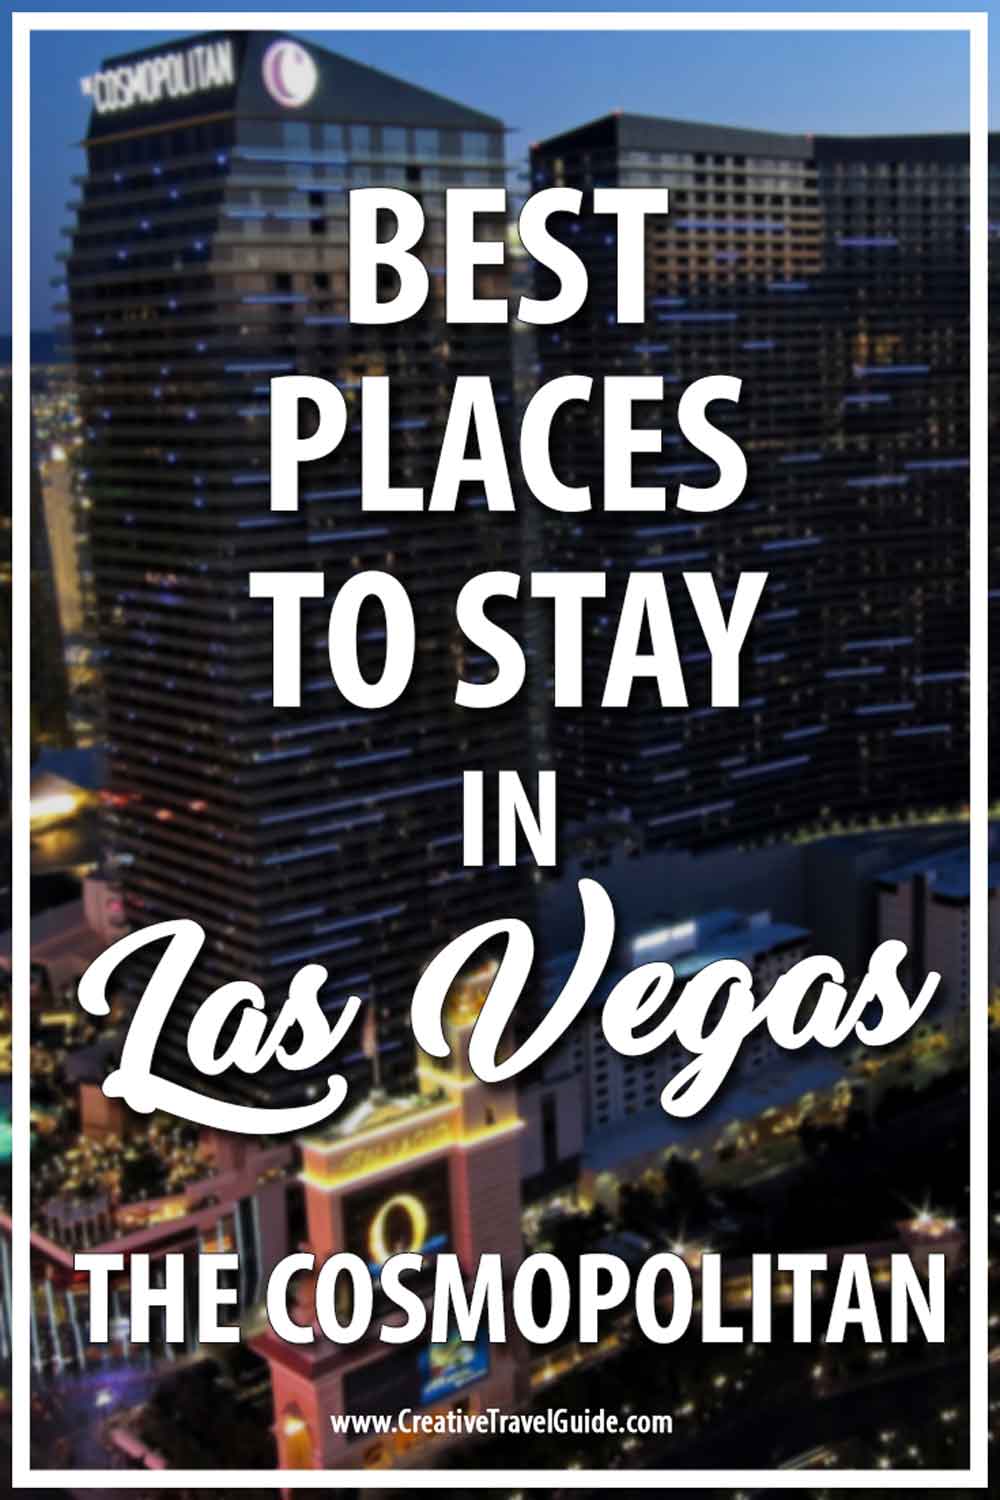 Best place to stay in vegas